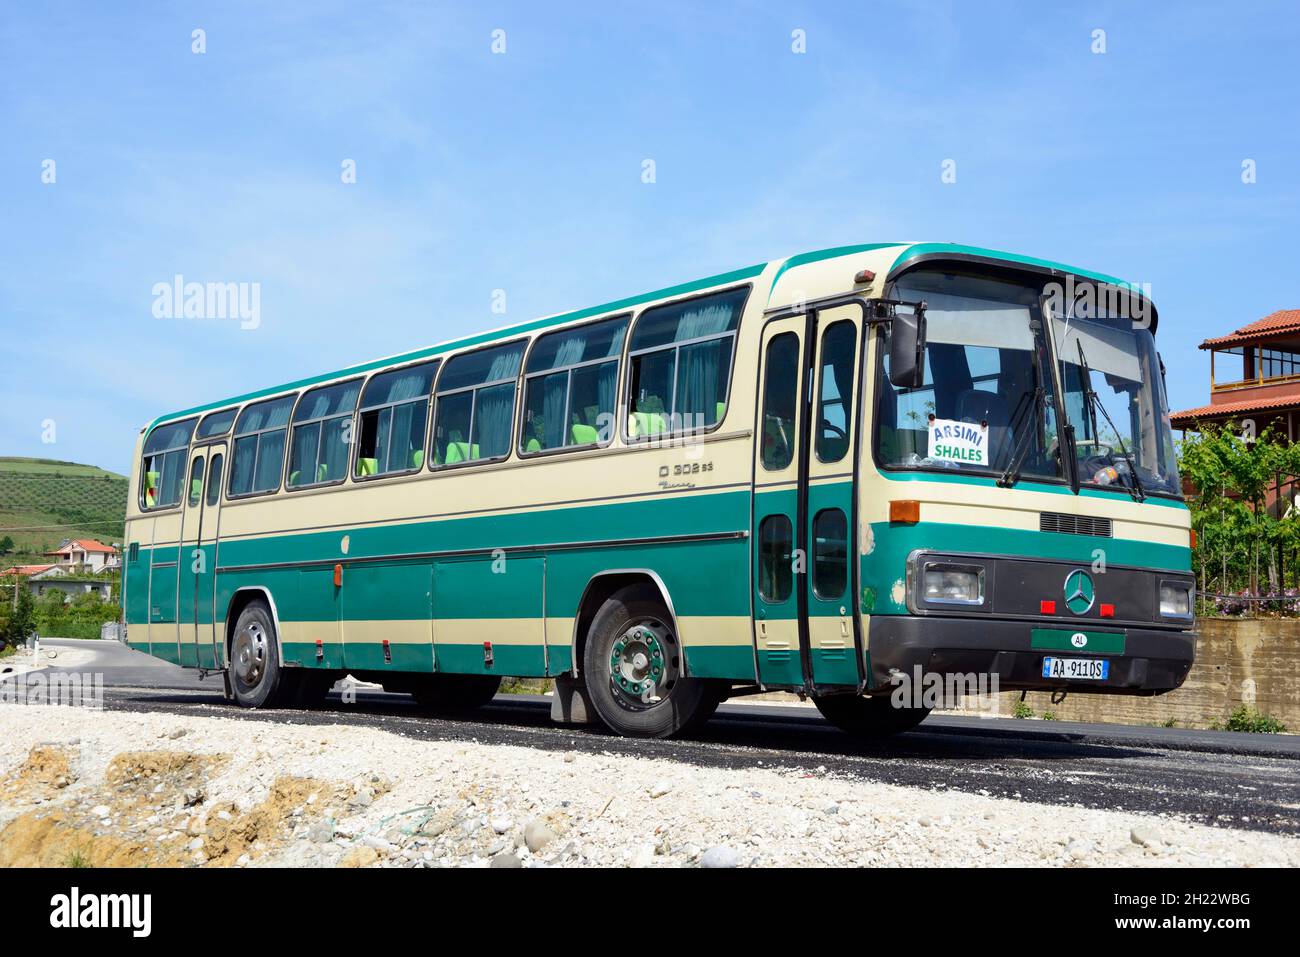 Mercedes Benz Bus High Resolution Stock Photography and Images - Alamy